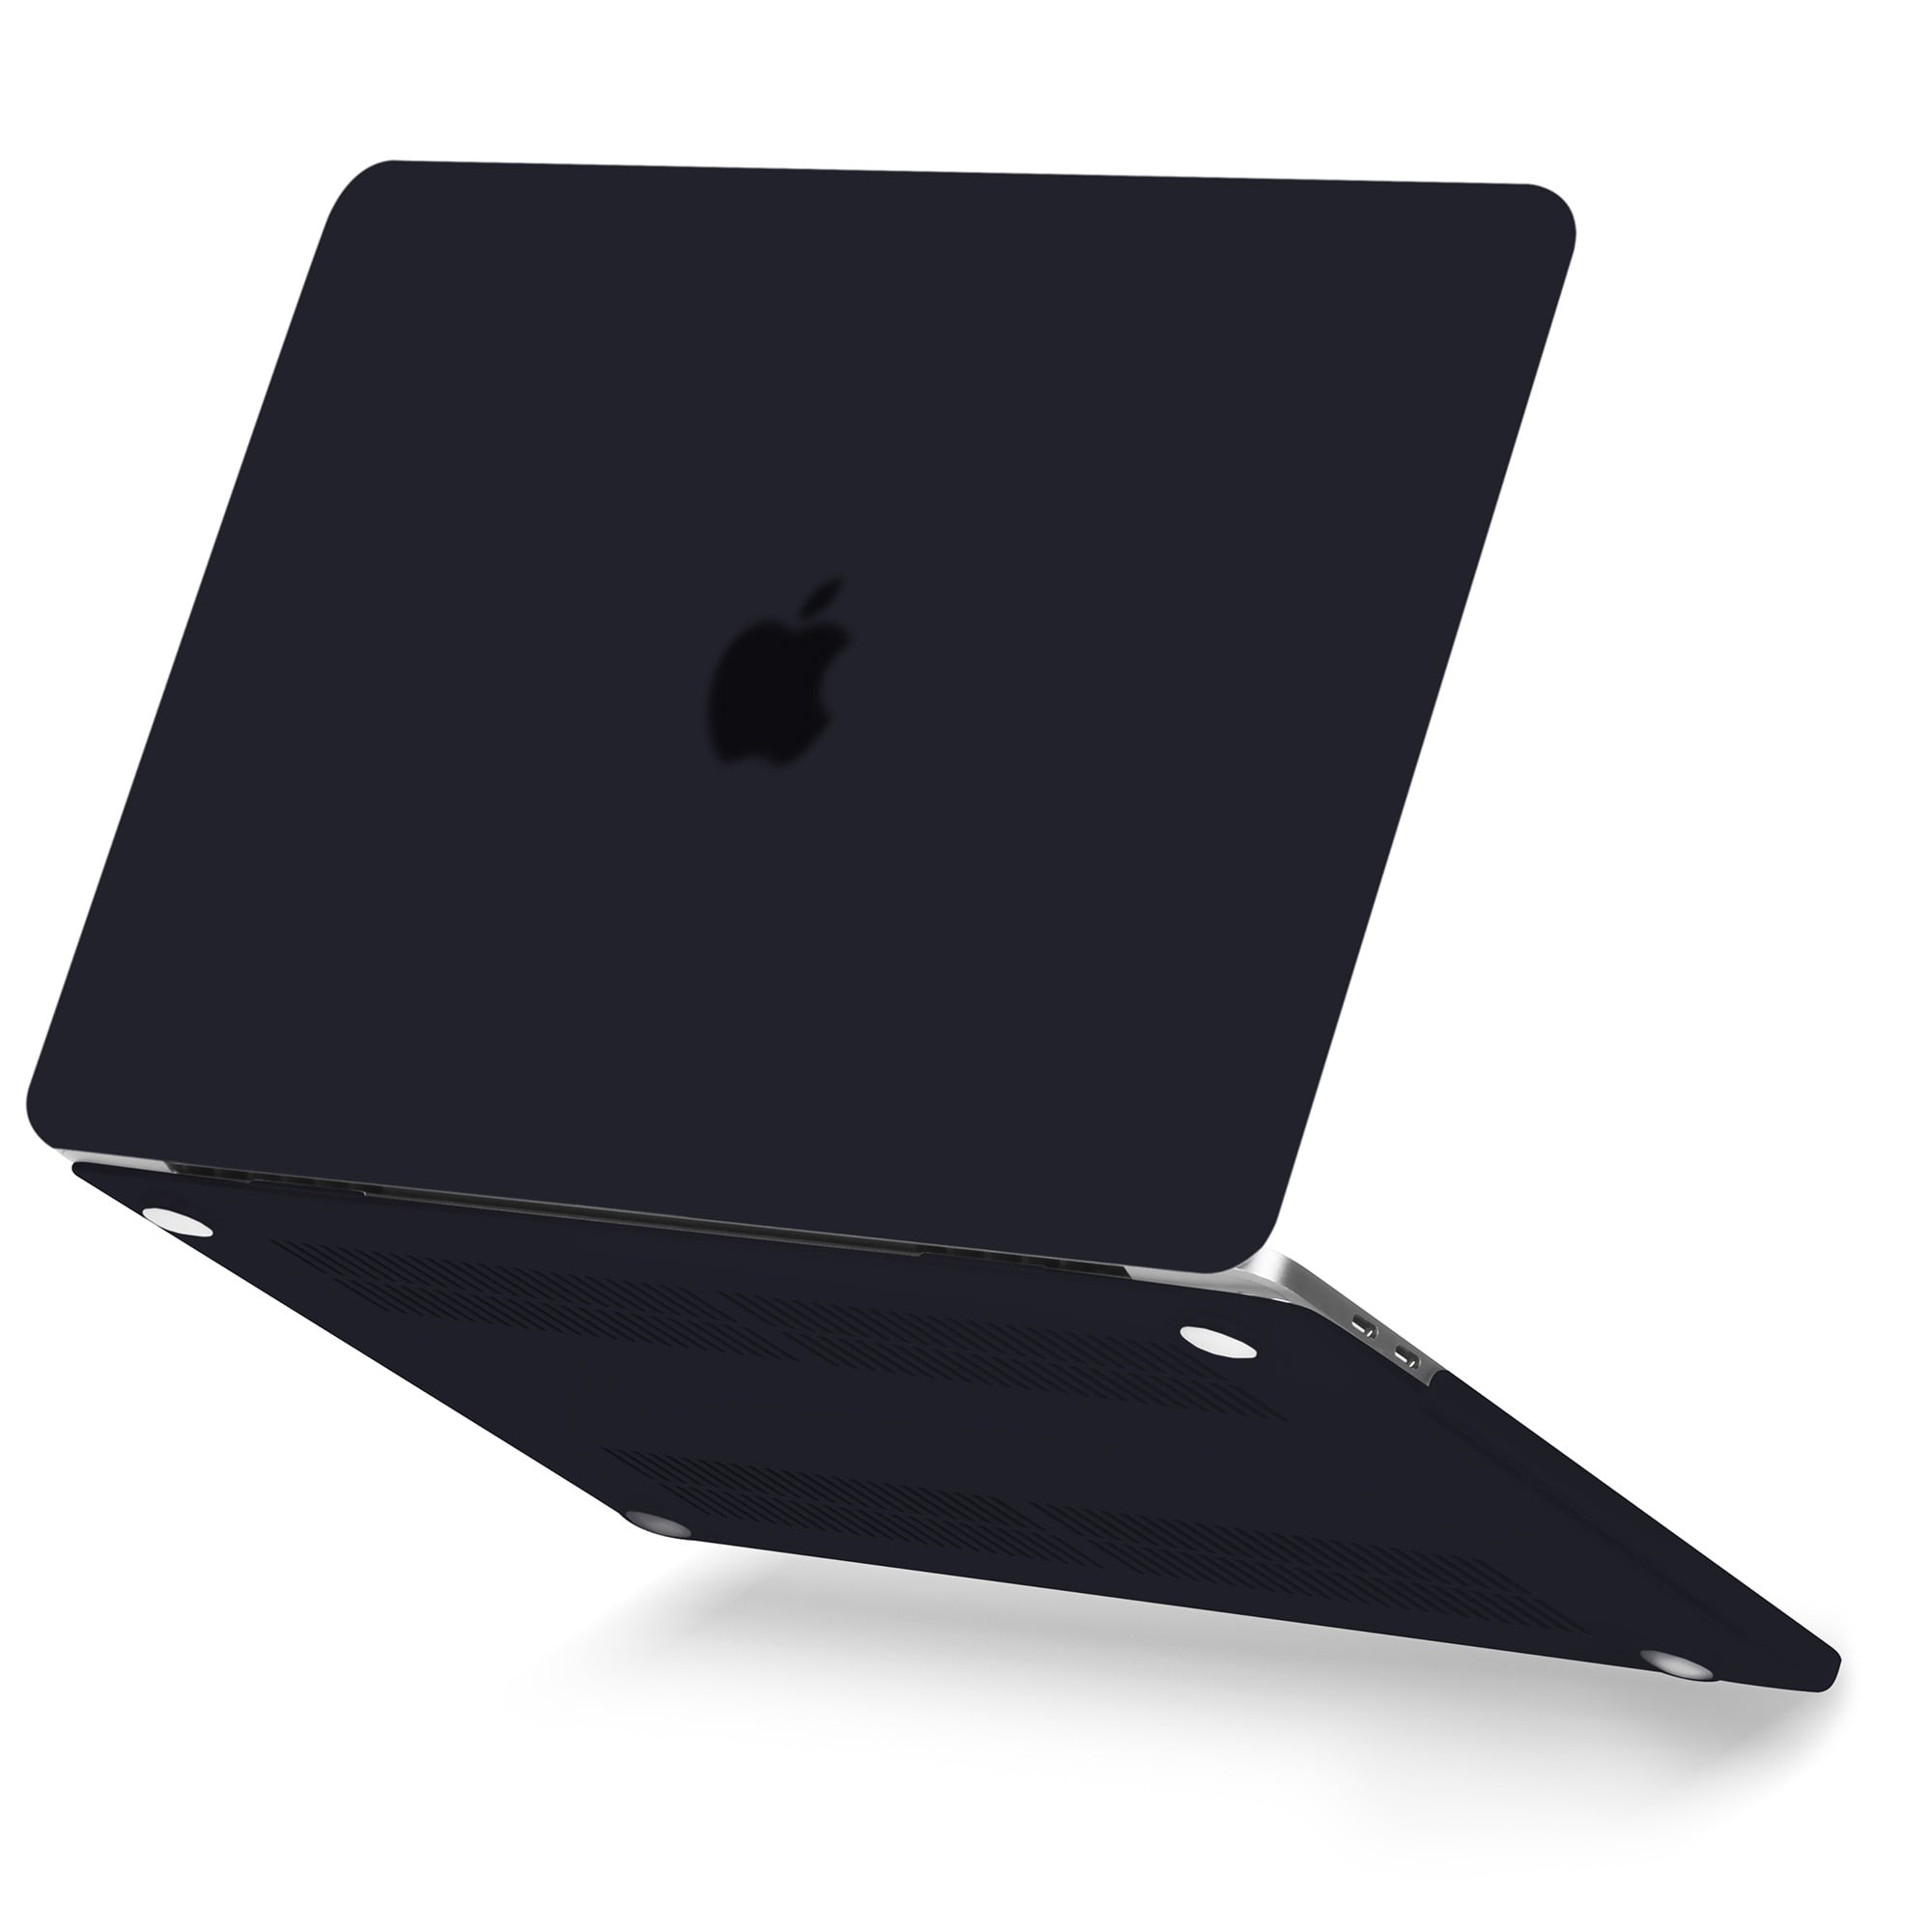 M1 A2338 A2289 A2251 A2159 A1989 A1706 A1708, 2016-2020 Release Compatible with MacBook Pro 13 inch Hard Plastic Shell Cover Case sea Lion - Cartton Seal